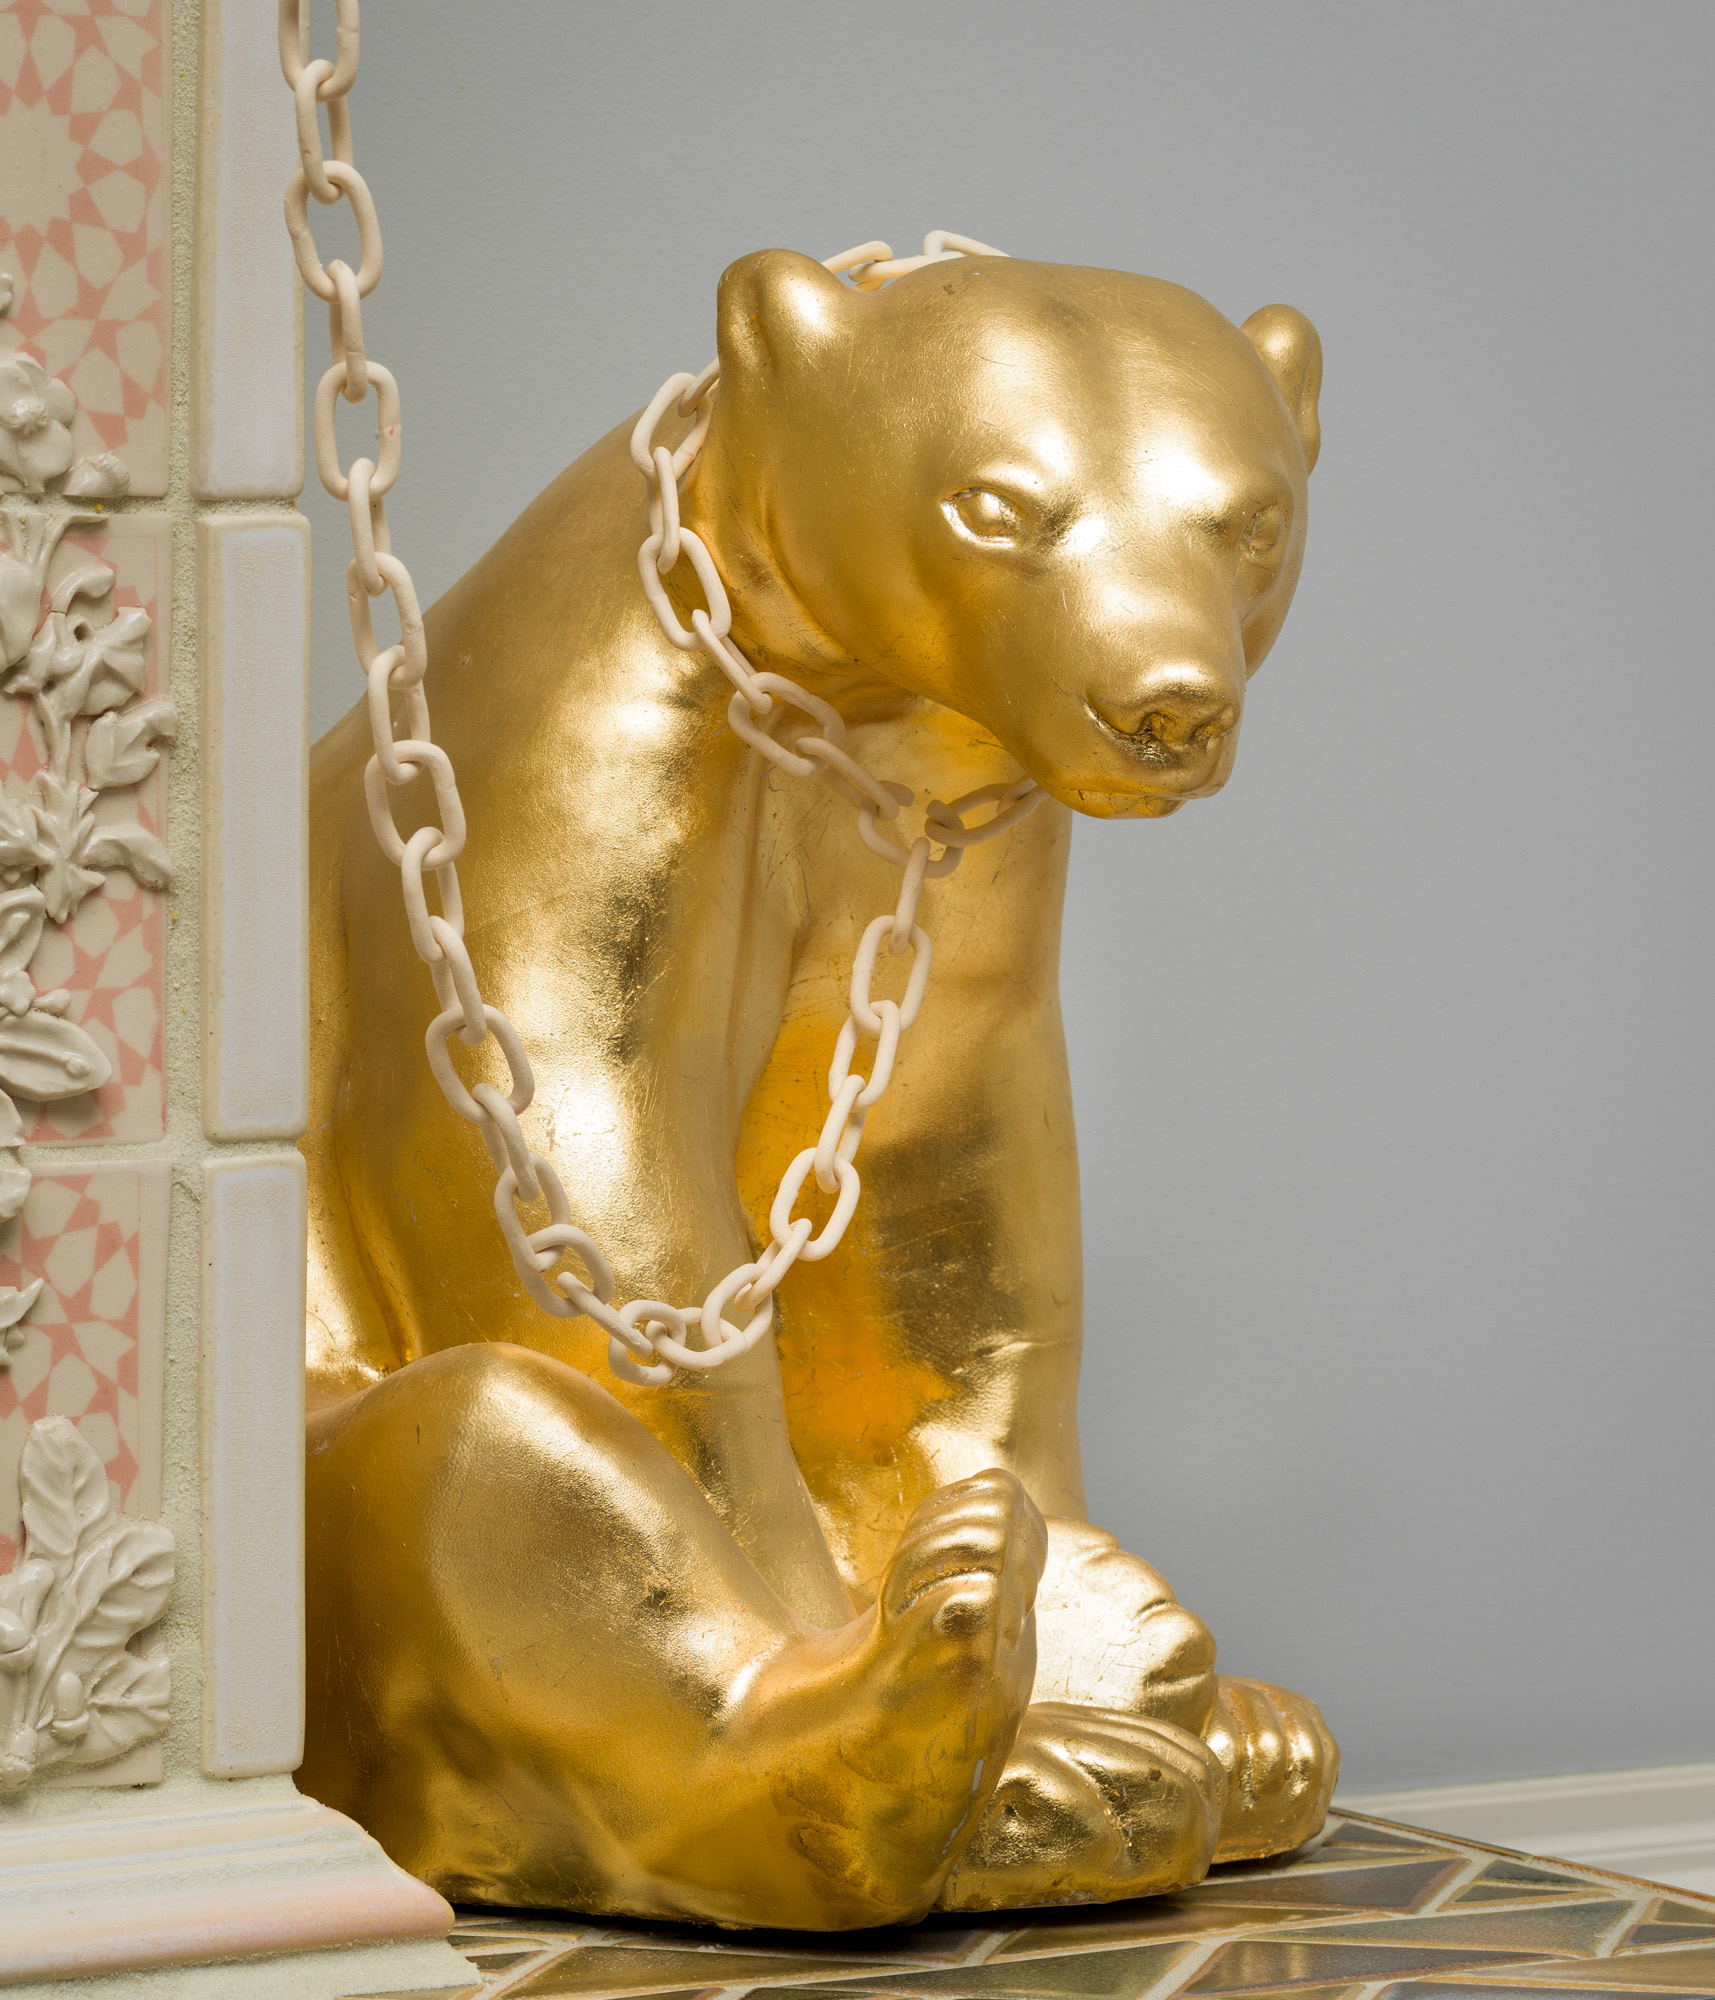 one of the golden bears with a chain around its neck sitting on the right side